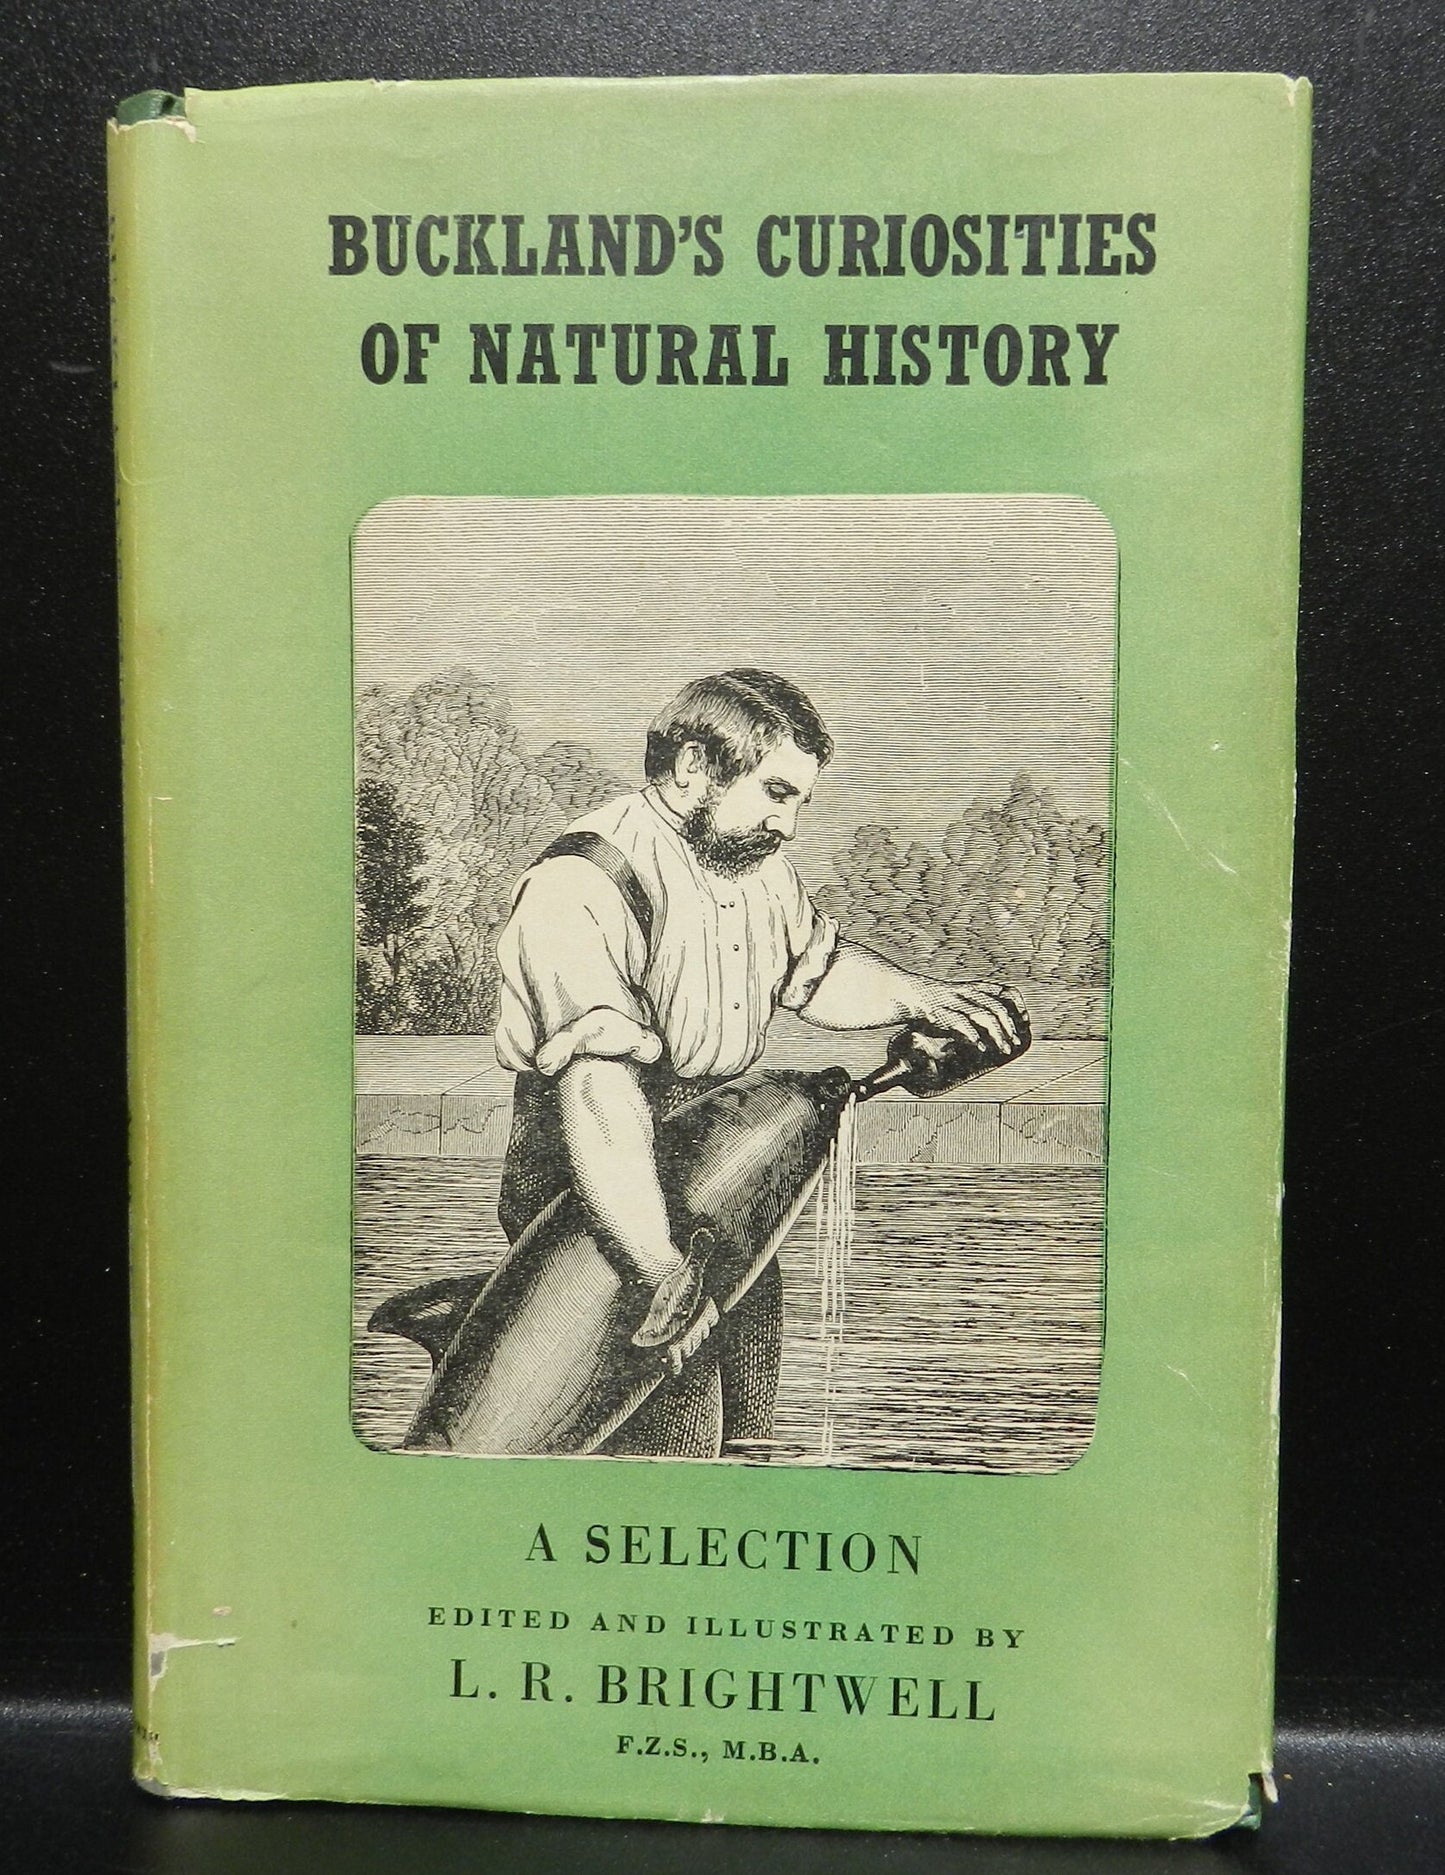 Vintage "Buckland's Curiosities of Natural History"  Book  by Brightwell,  Original DJ